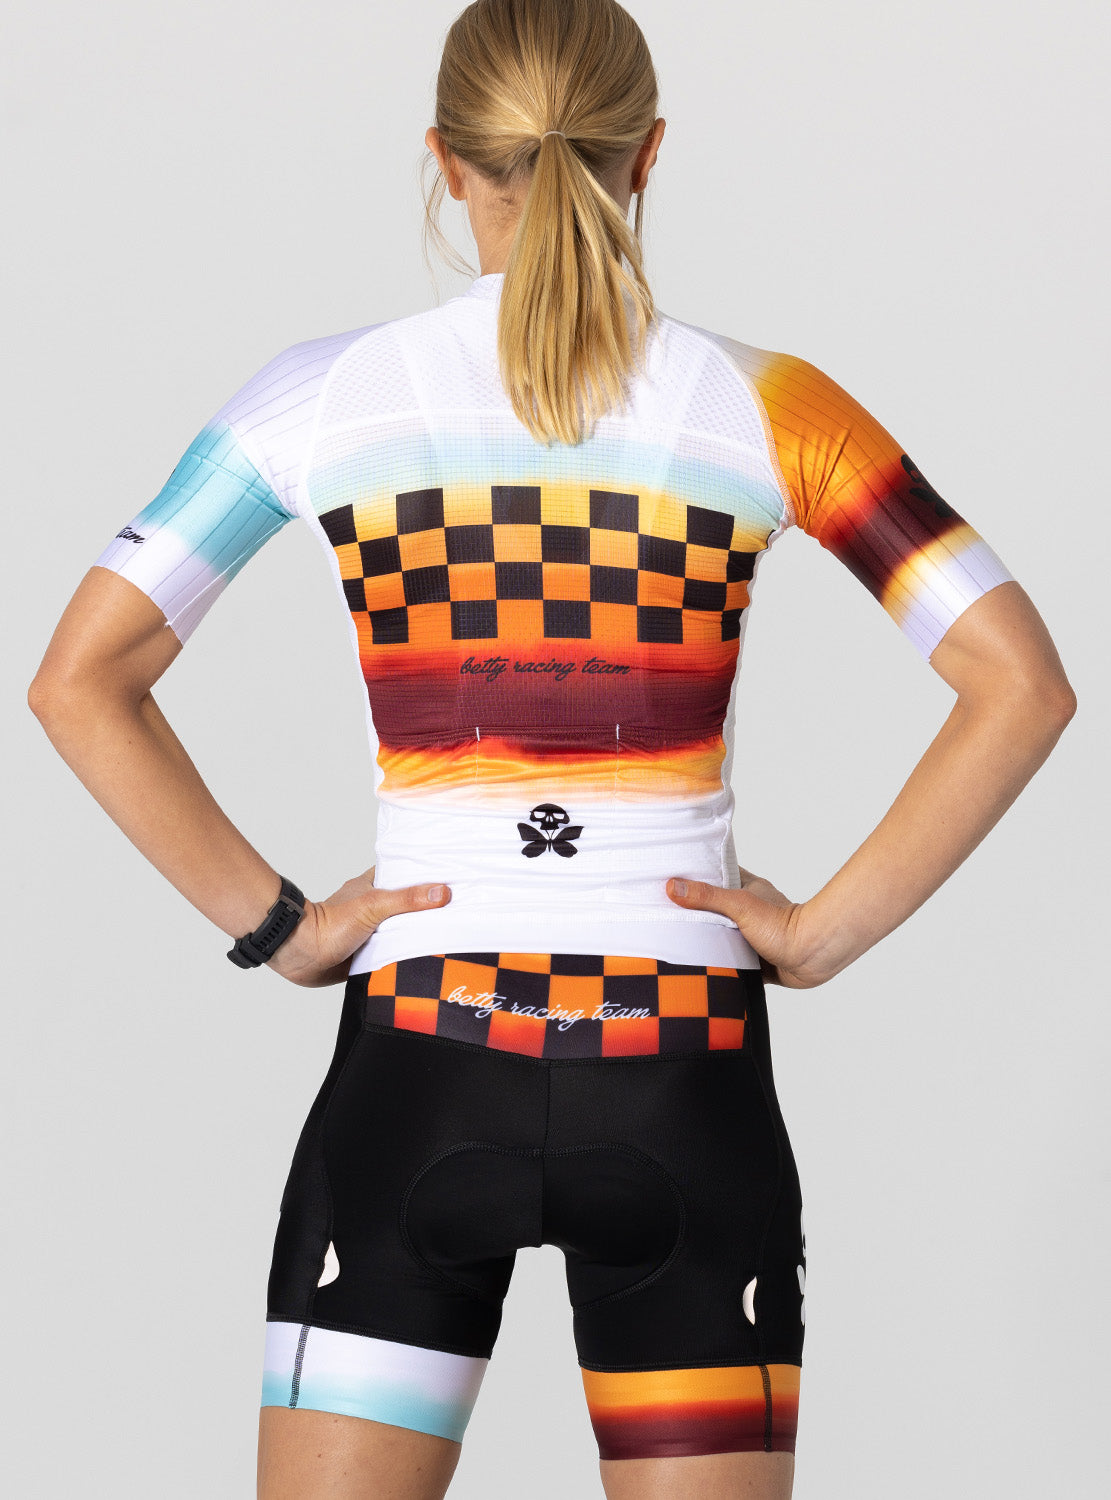 betty designs womens racing the sunset cycling jersey